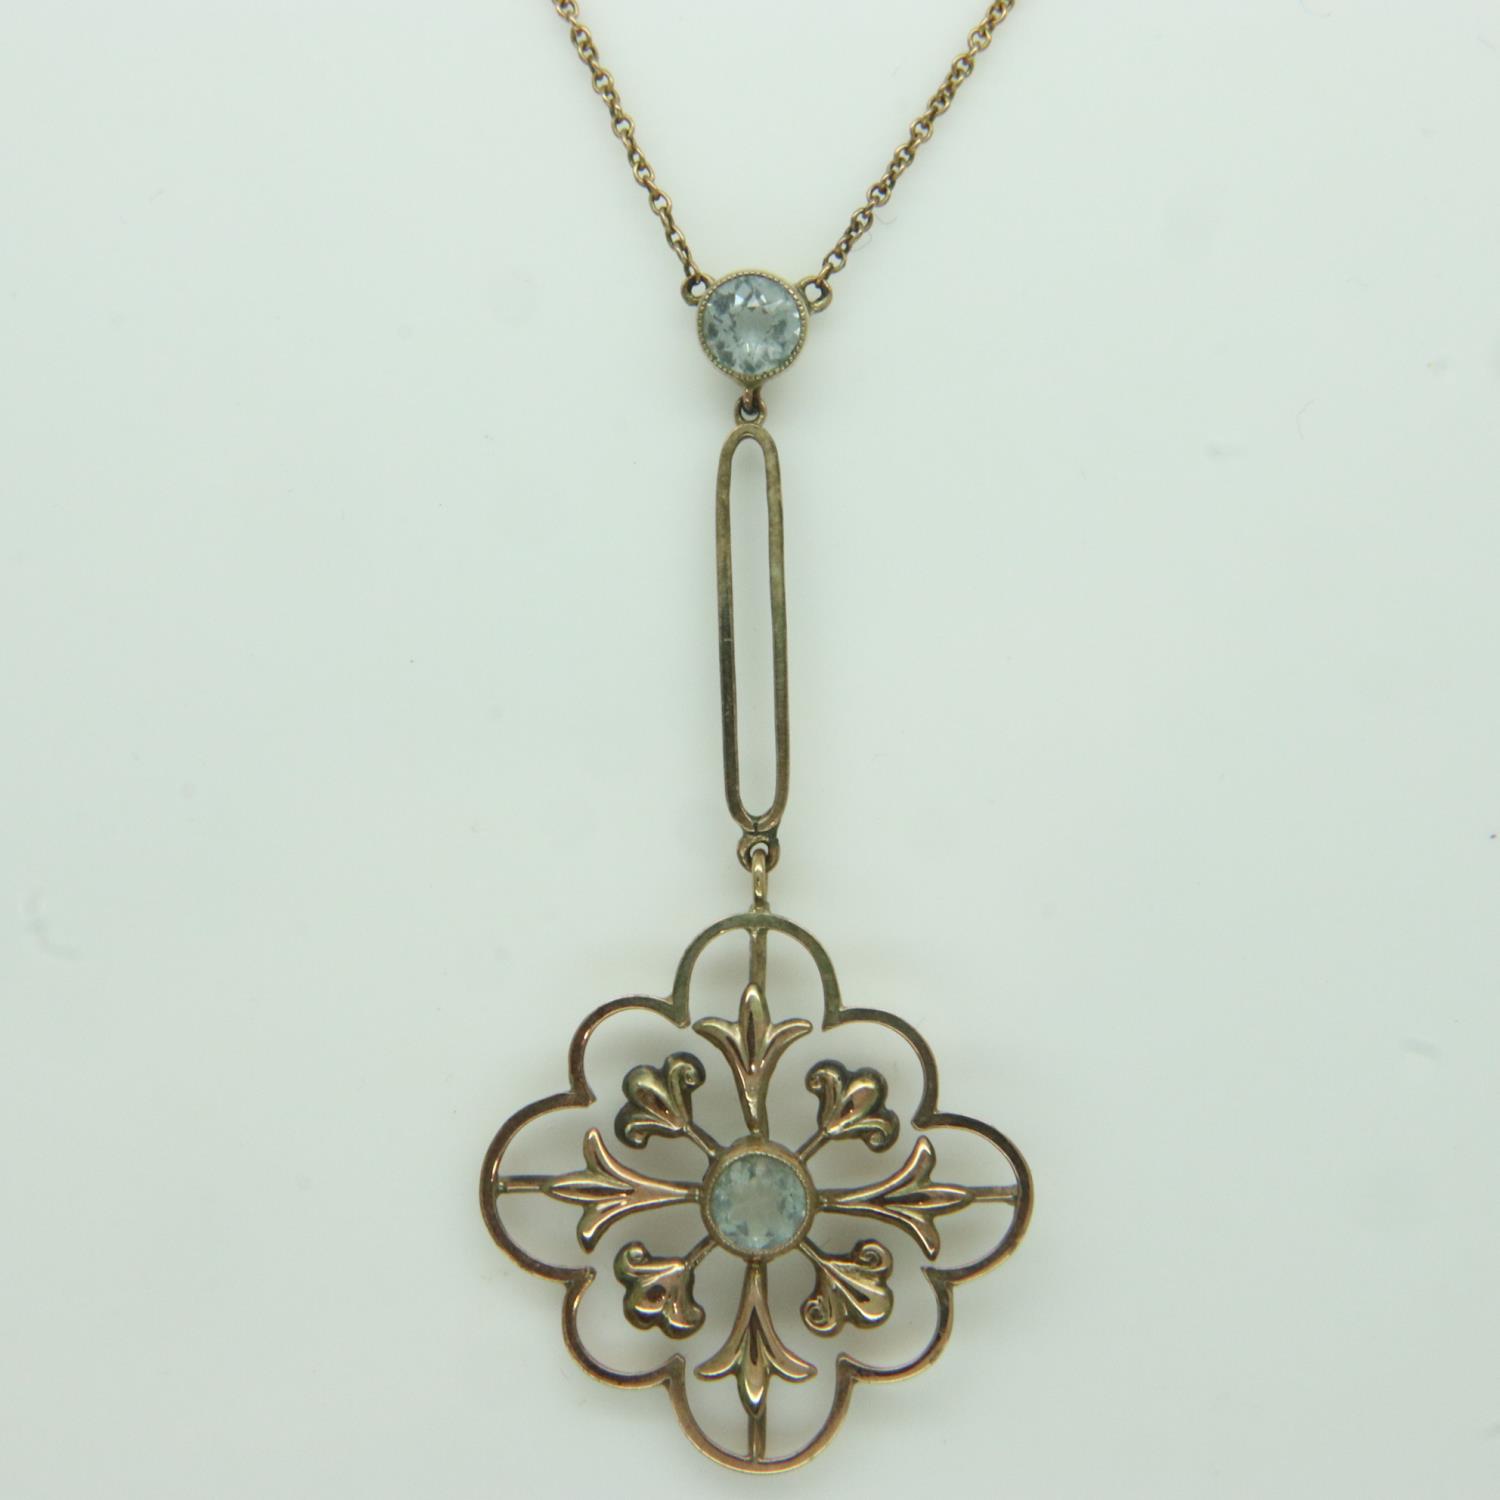 Edwardian rolled gold pendant and chain with blue stones, L: 34 cm, 3.7g. UK P&P Group 0 (£6+VAT for